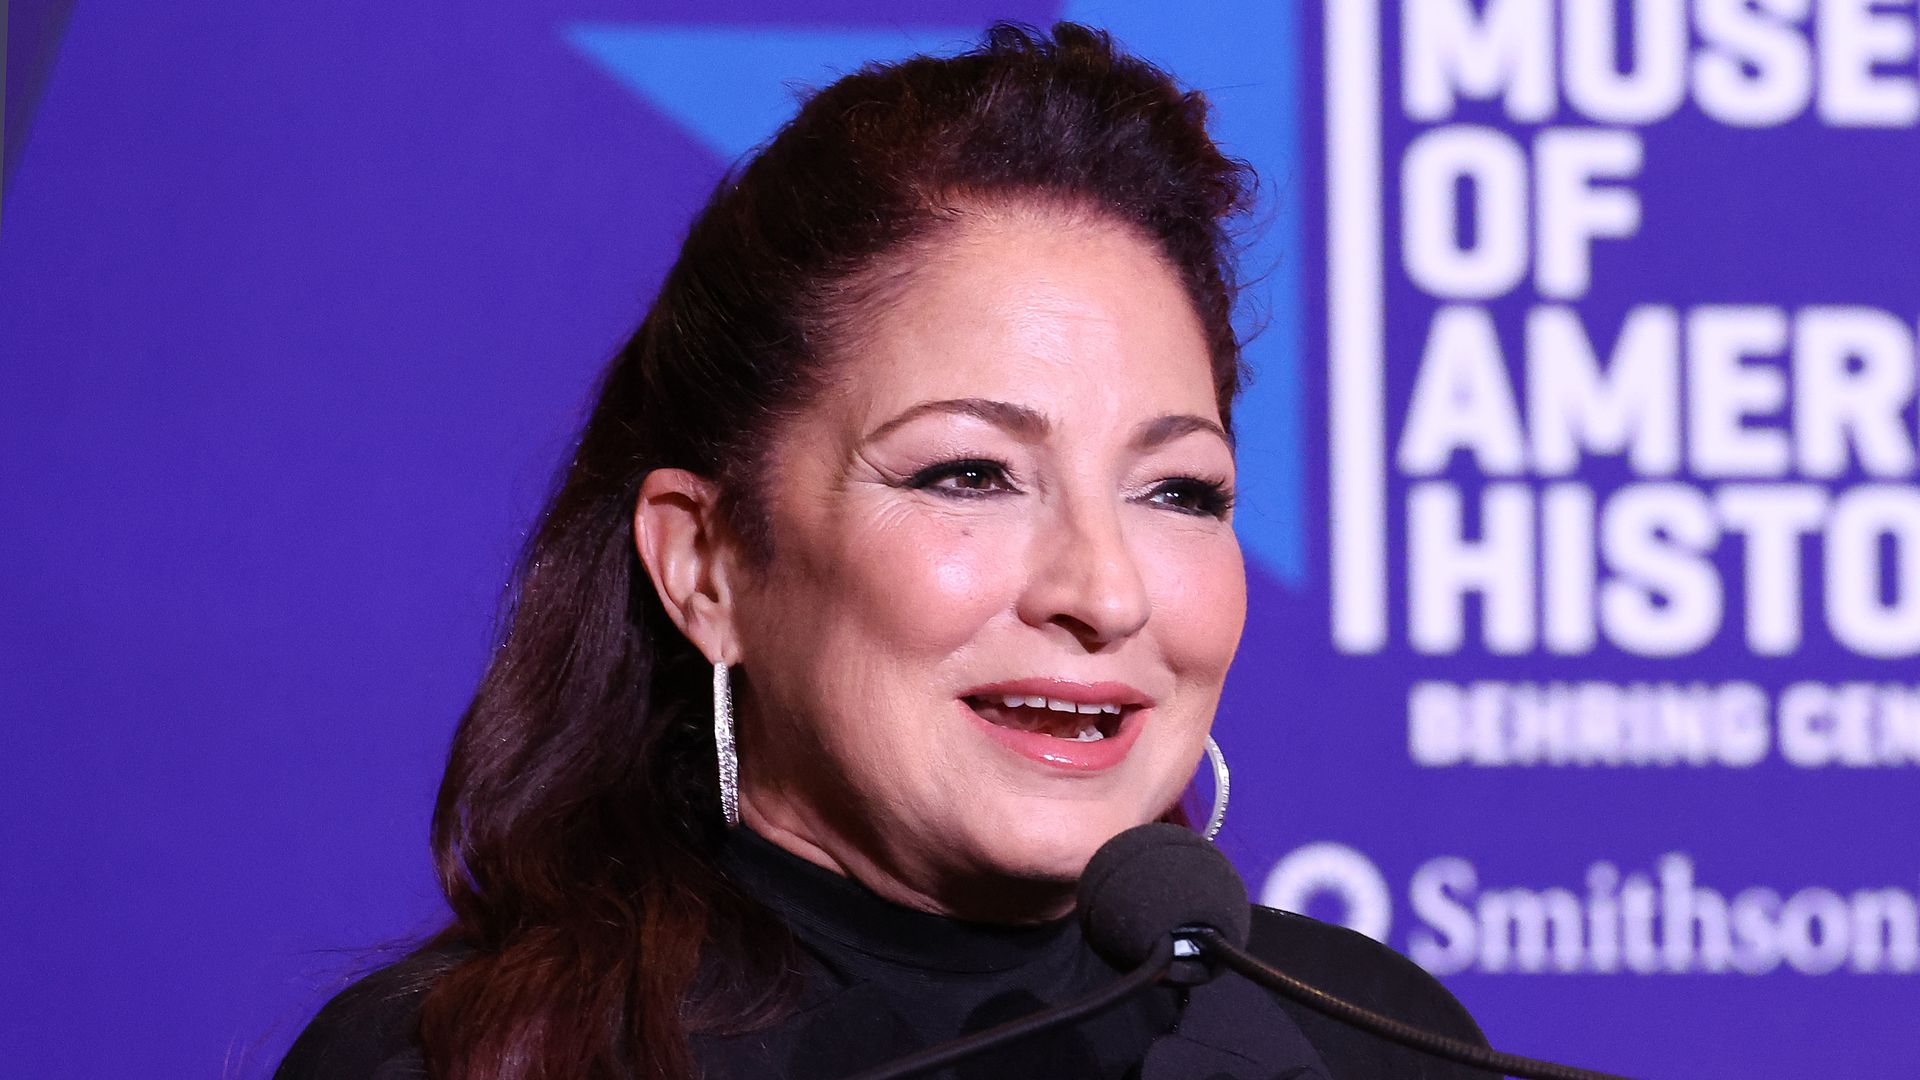 Gloria Estefan smiles while in front of a a purple background 